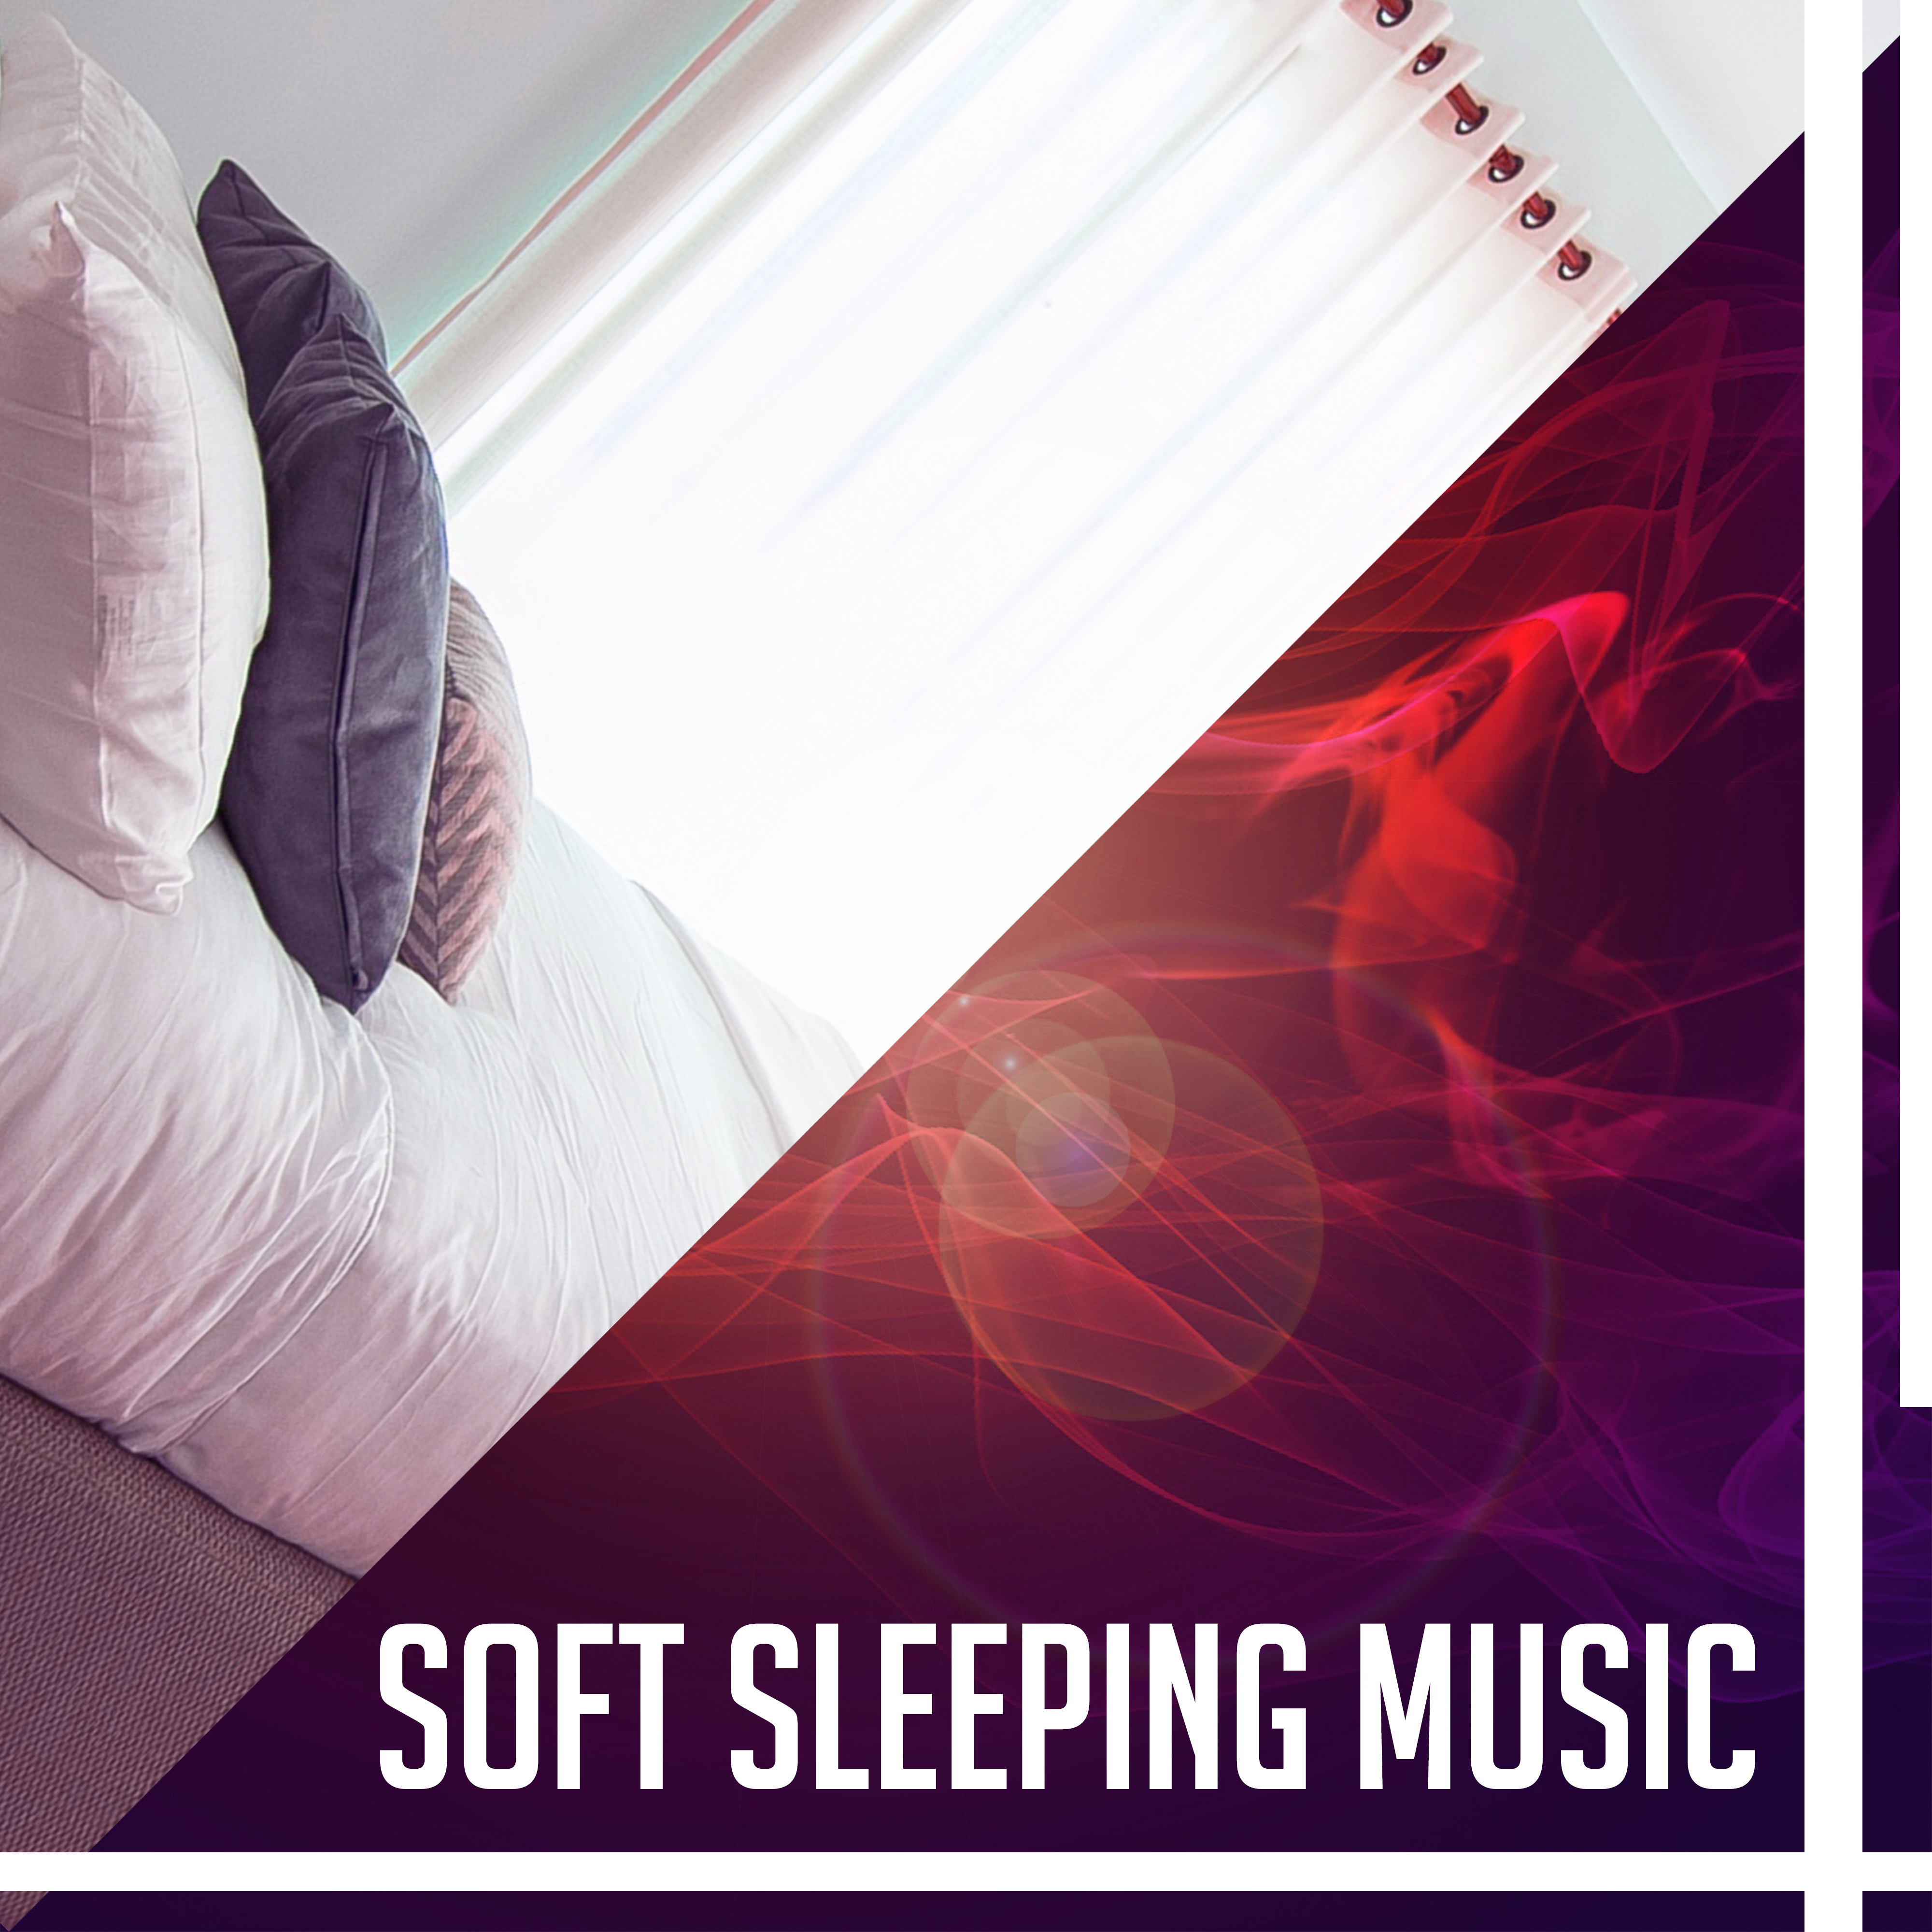 Soft Sleeping Music – Peaceful Mind, Sounds at Goodnight, Calm Lullabies, Stress Relief, Deep Sleep, Soothing Sounds for Relaxation